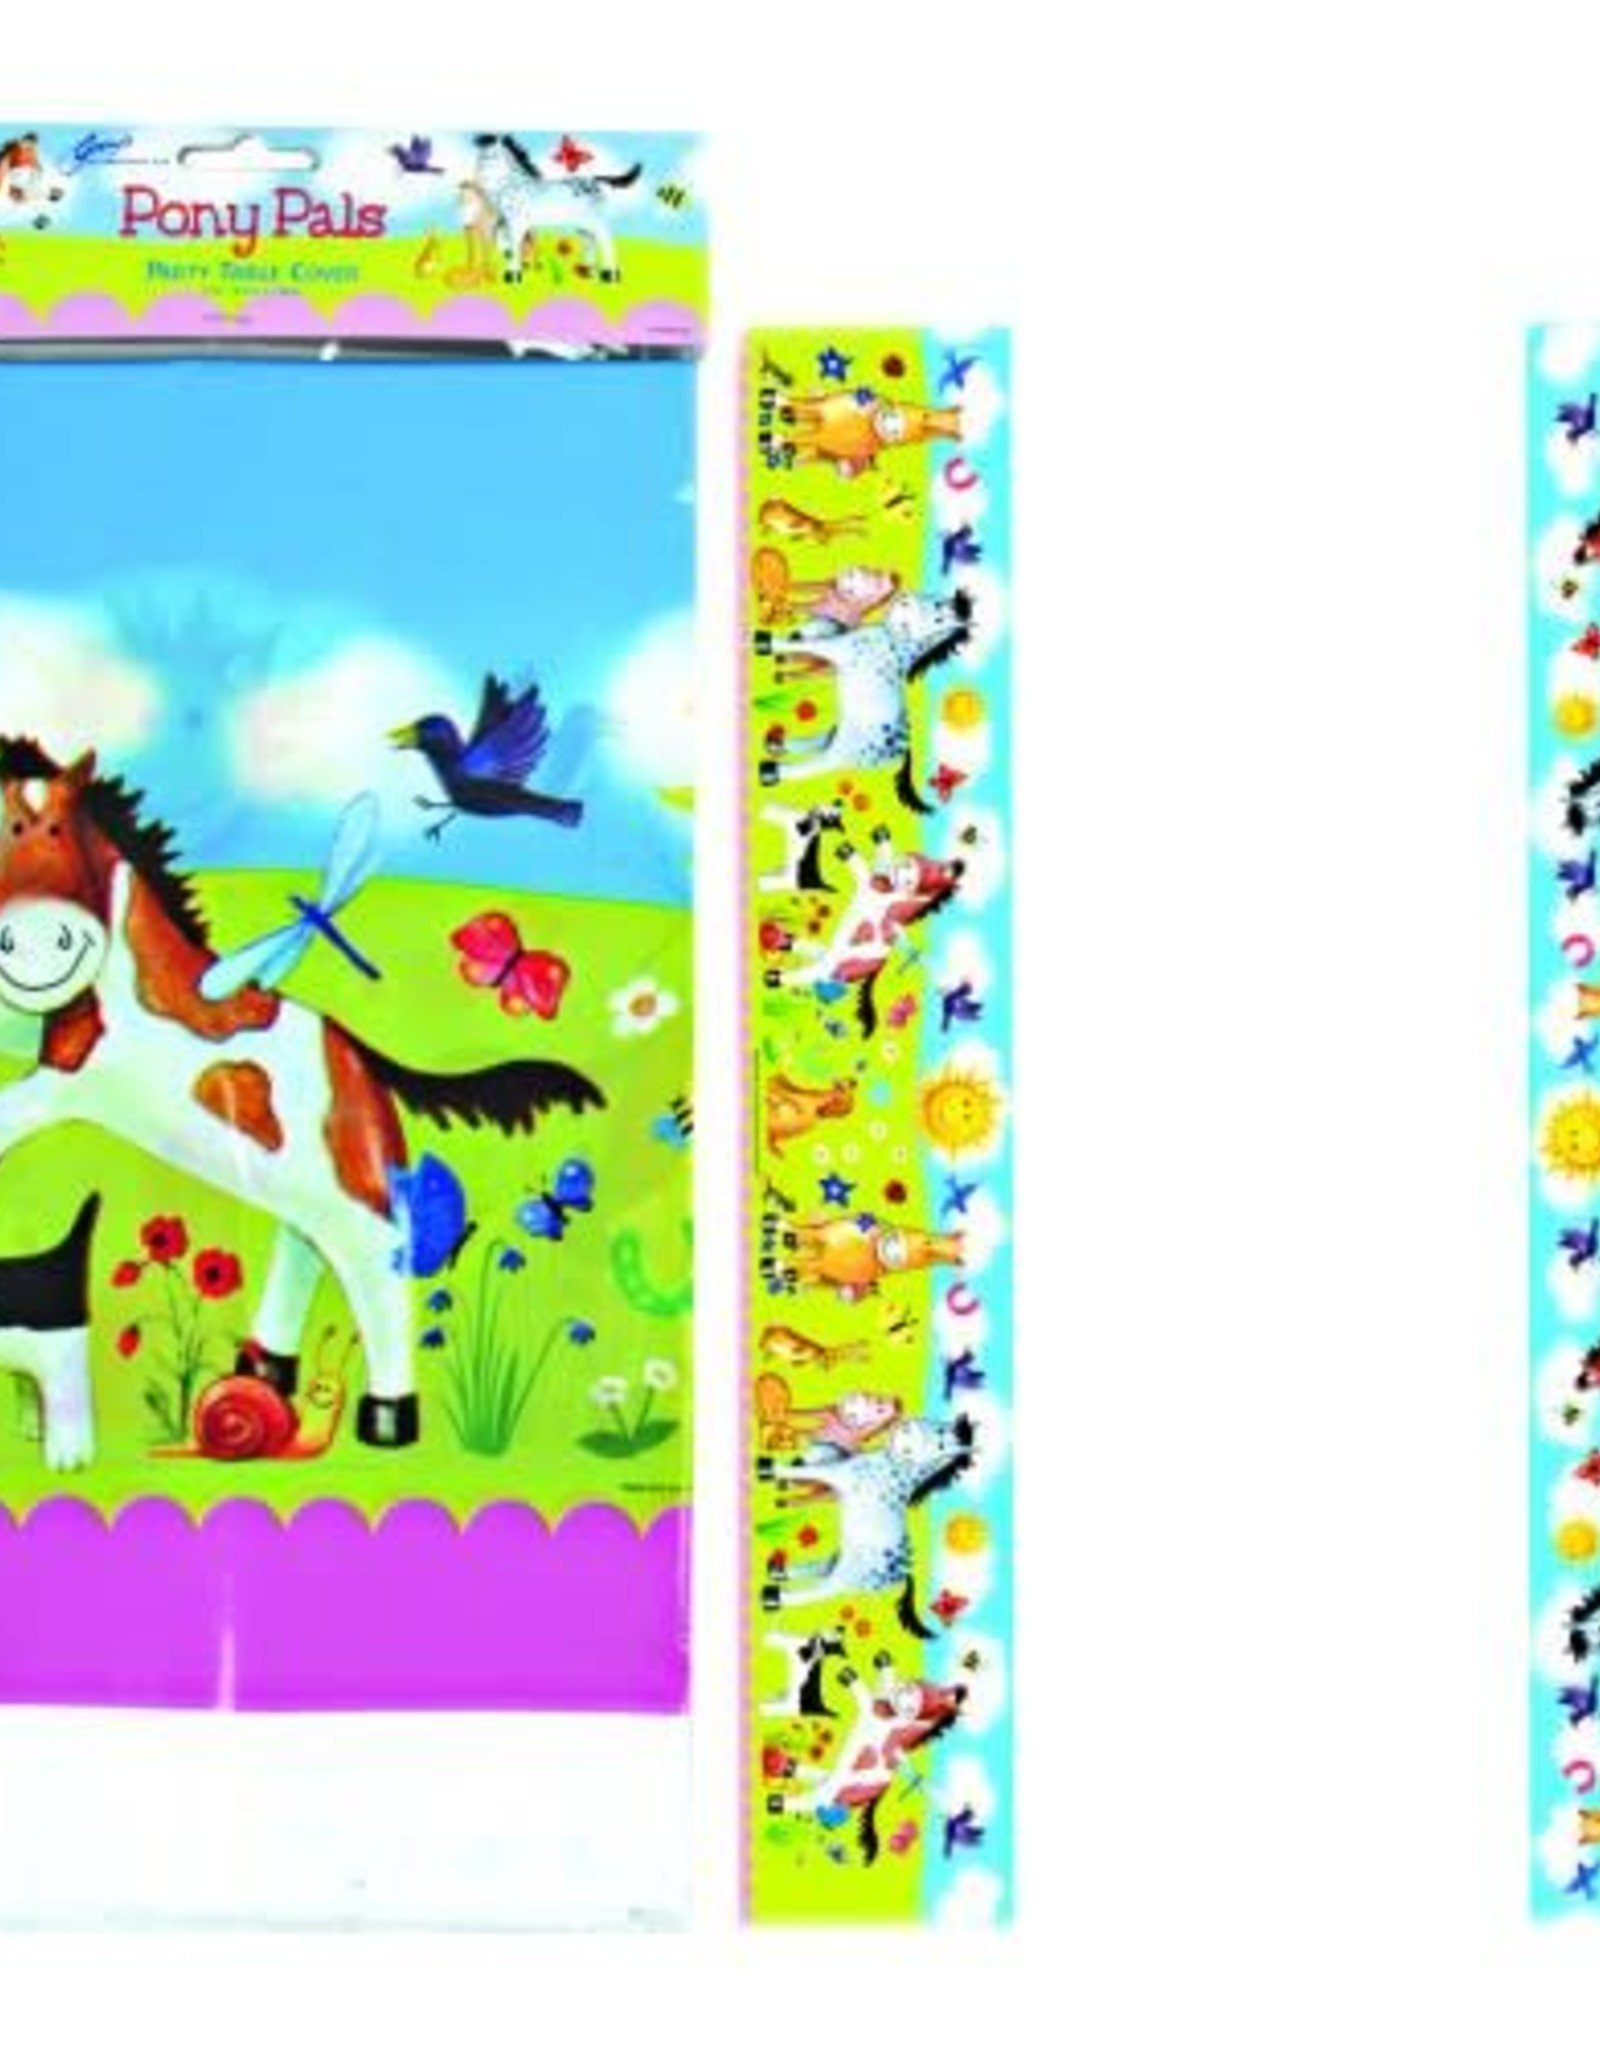 Pony Pals Table Cover